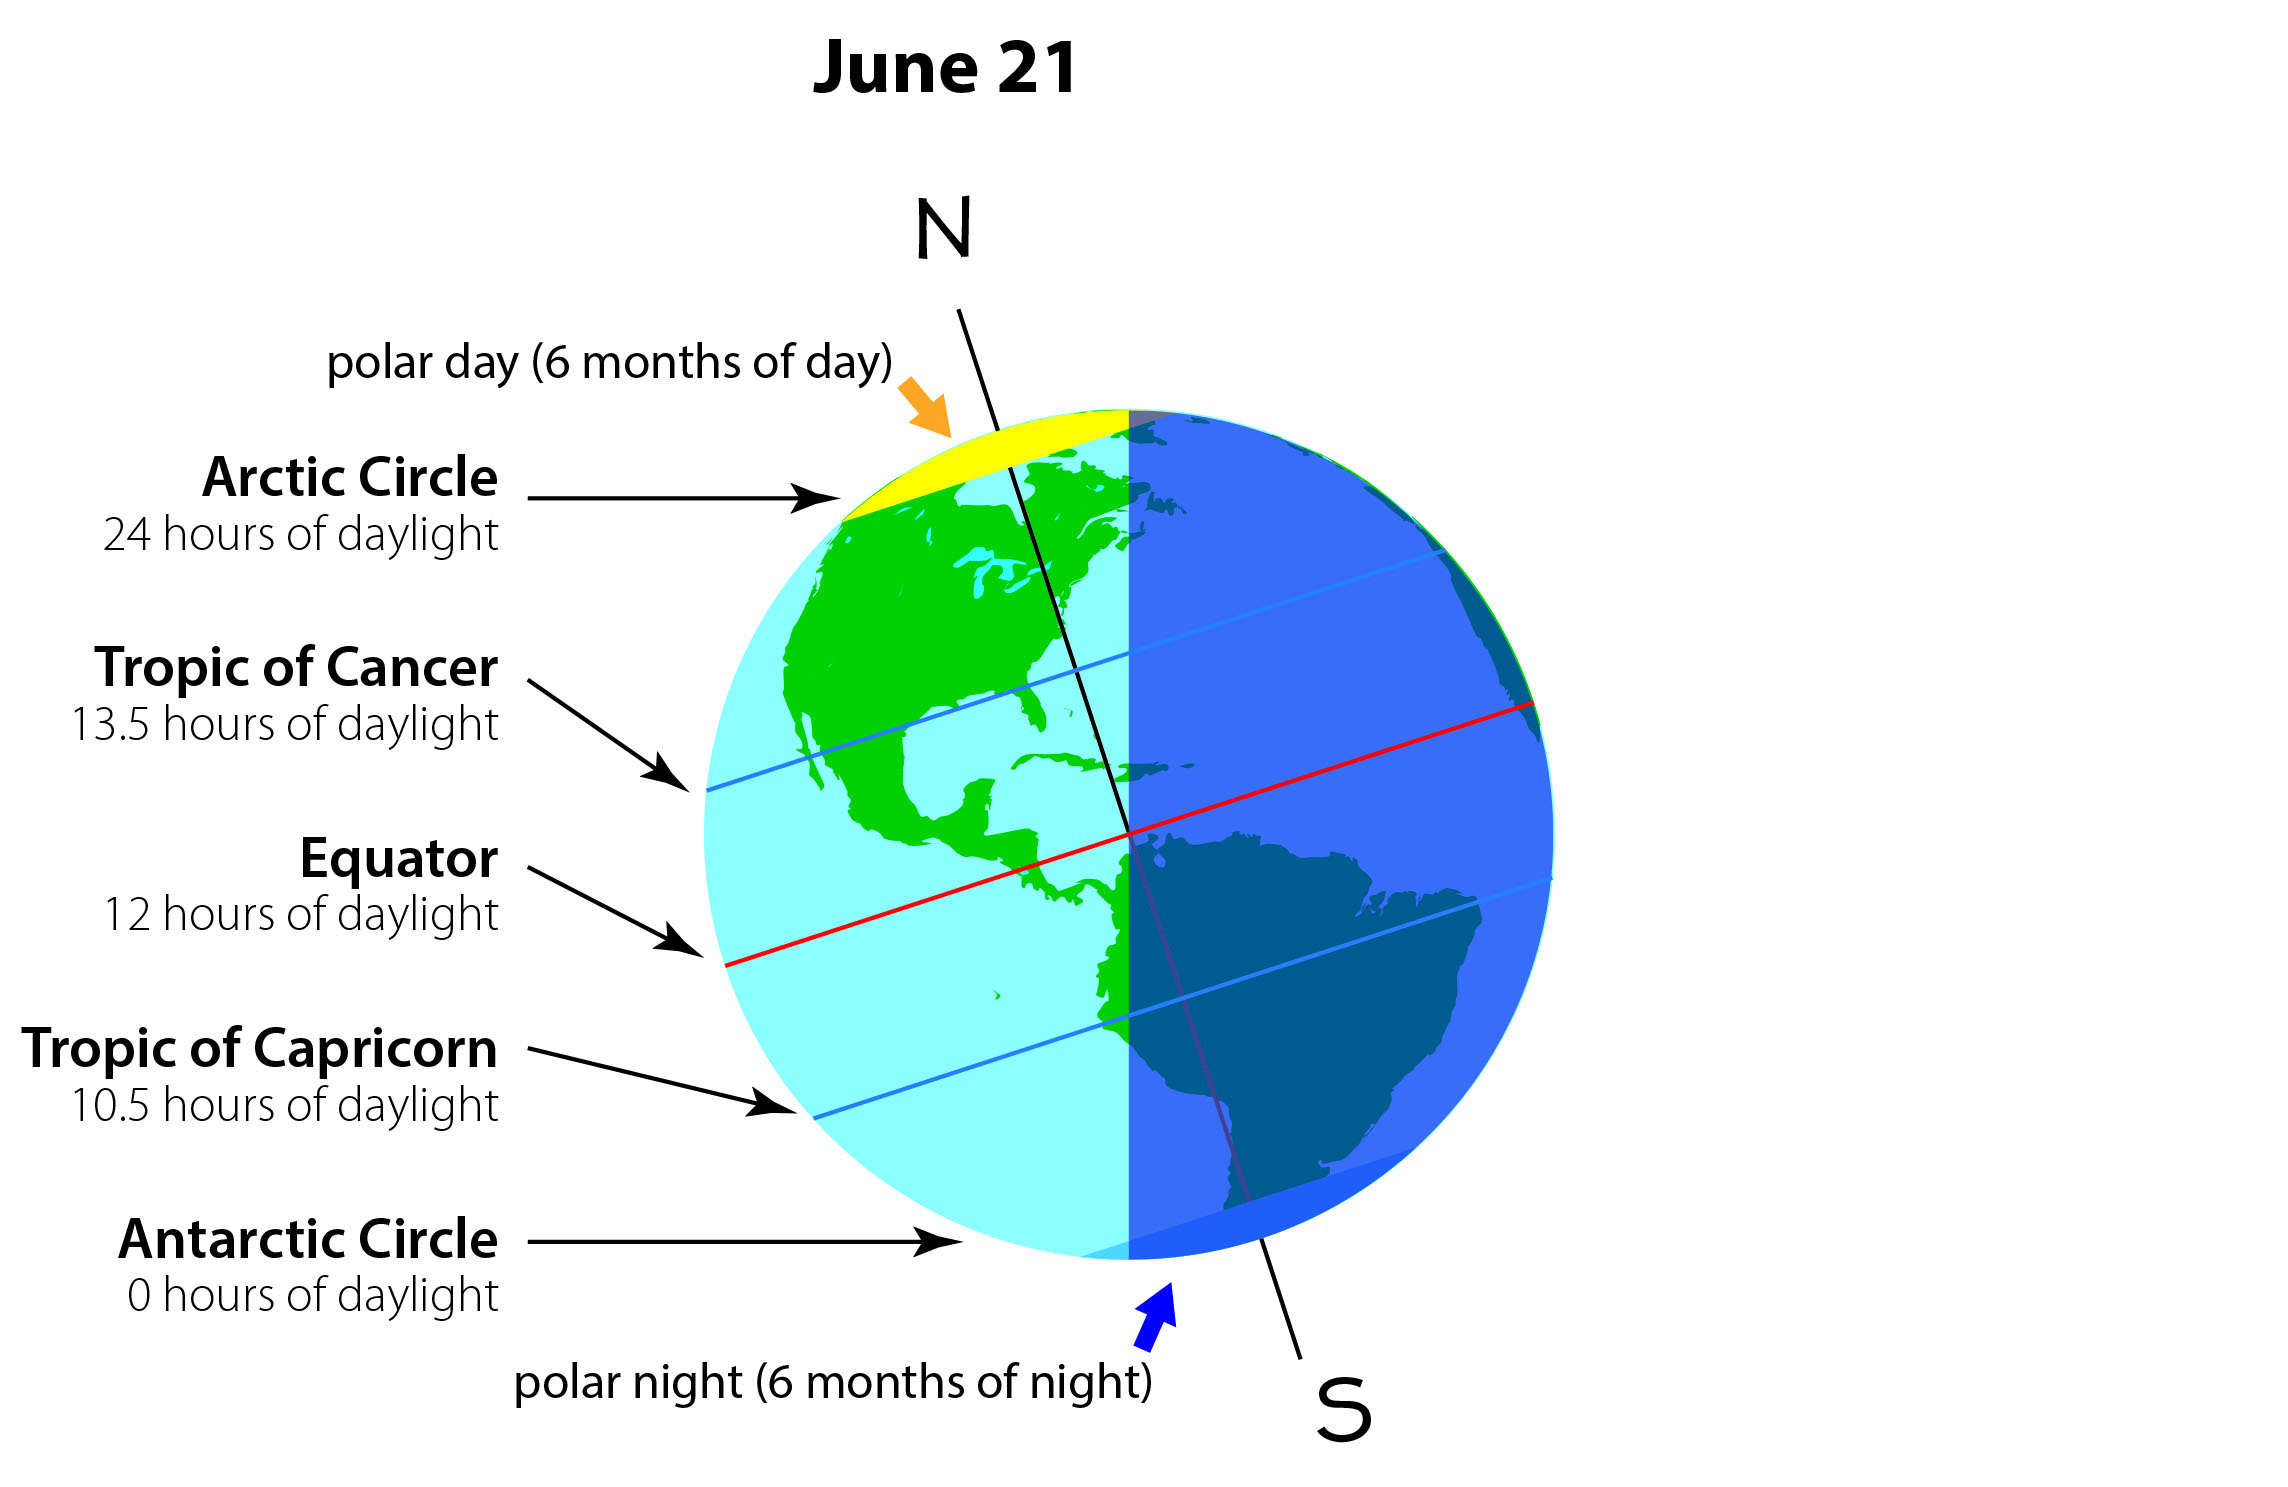 The number of hours of daylight each day varies with latitude.